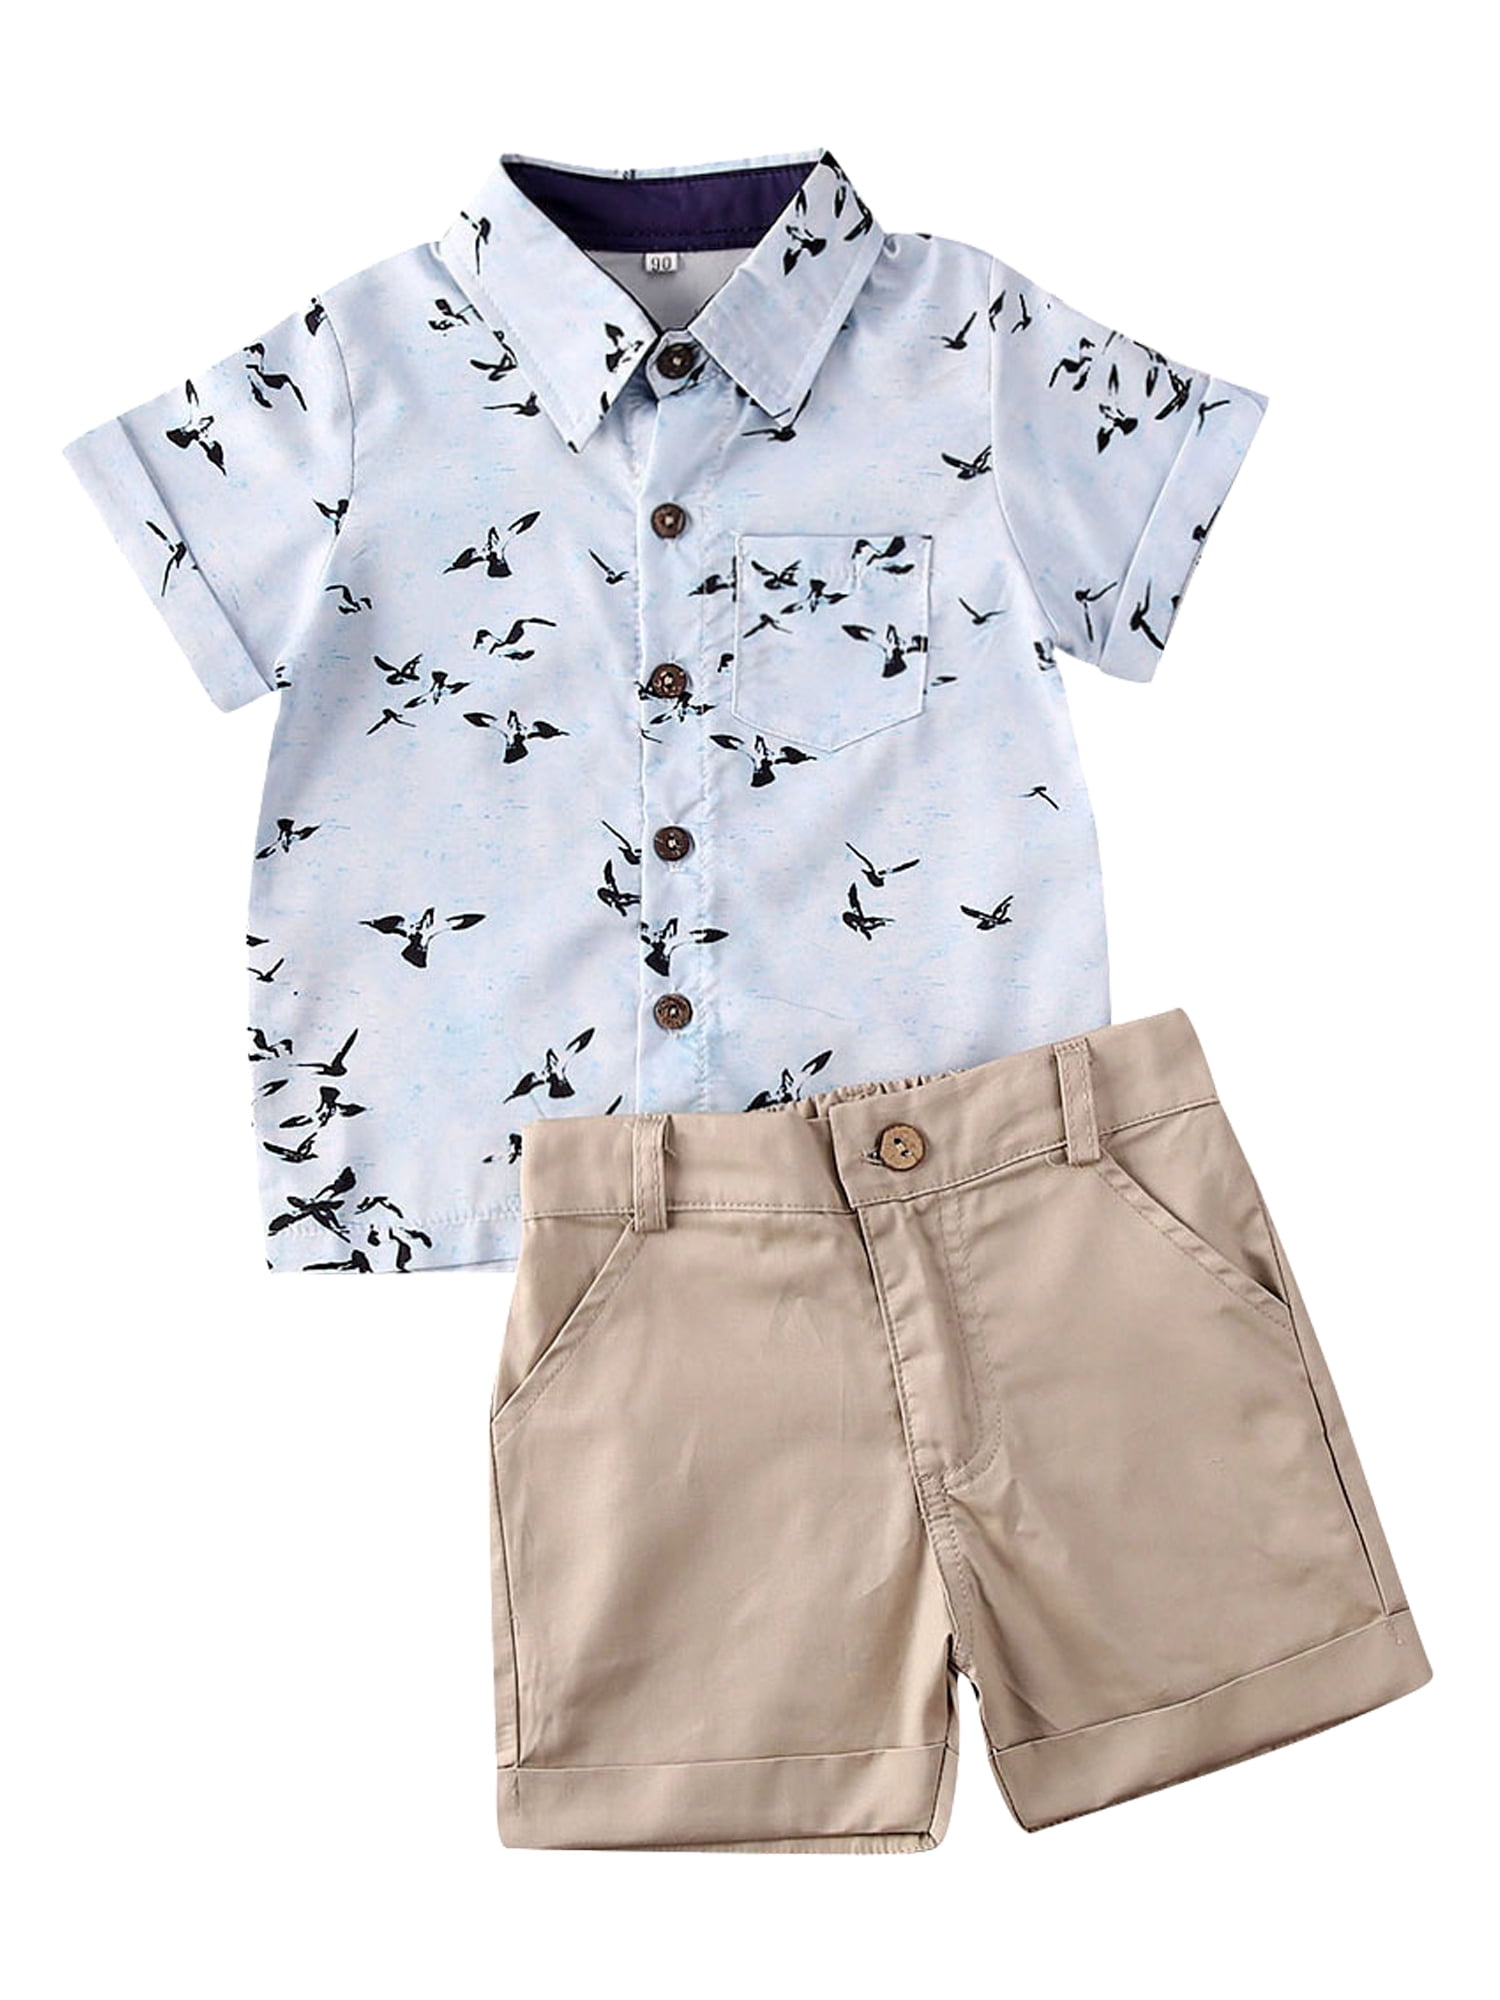 Kids Boys 2 Piece Short Sleeve Tshirt Shorts Set Outfits 1 to 5 Age Baby